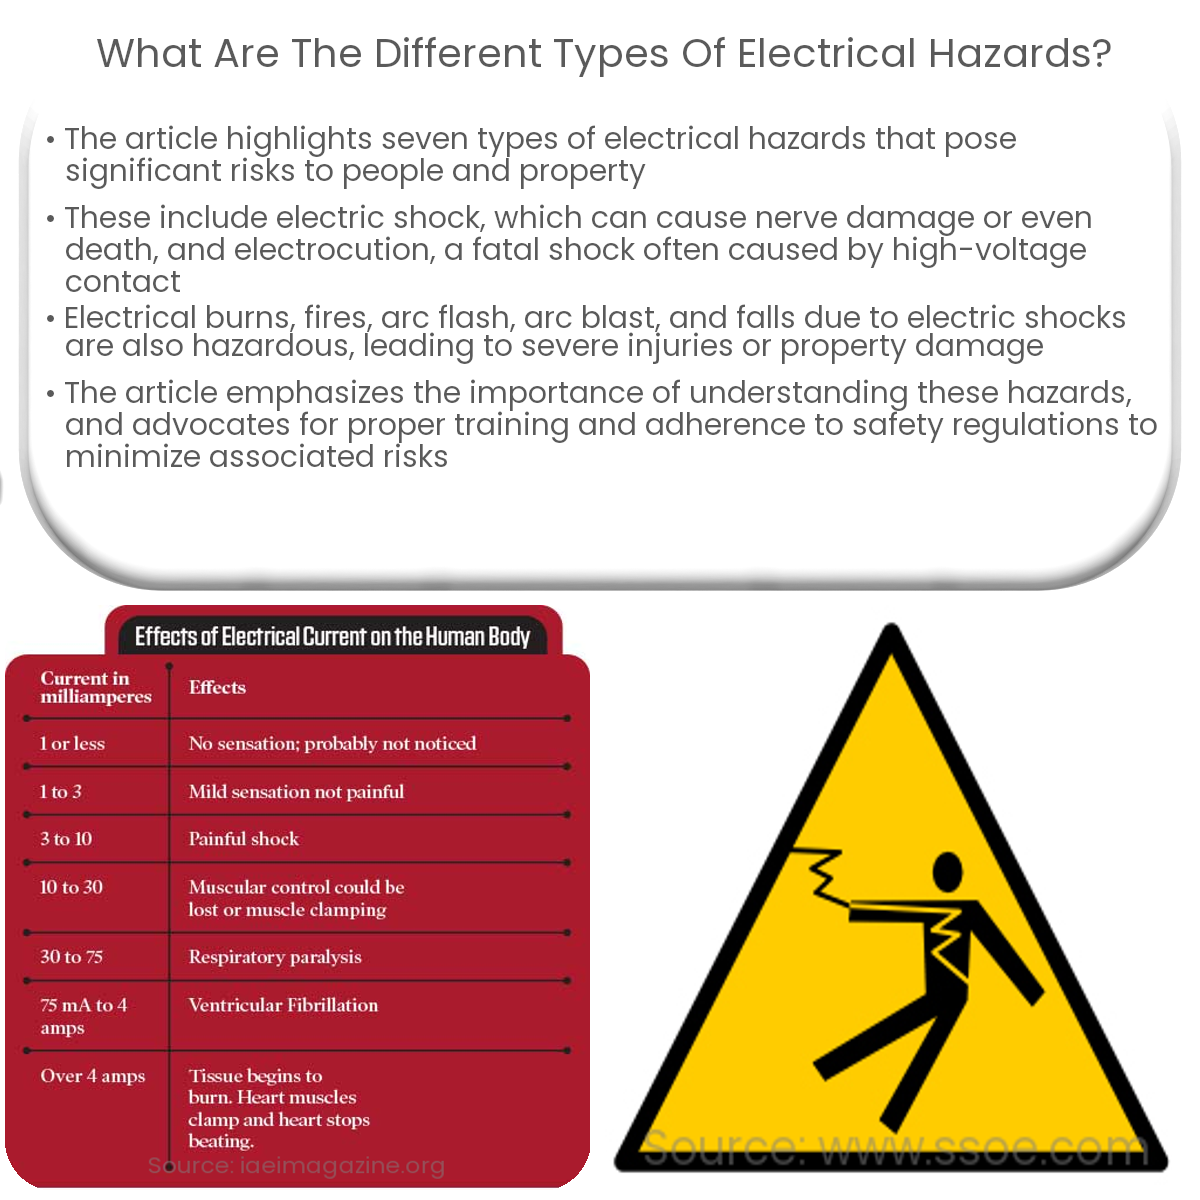 What are the different types of electrical hazards?